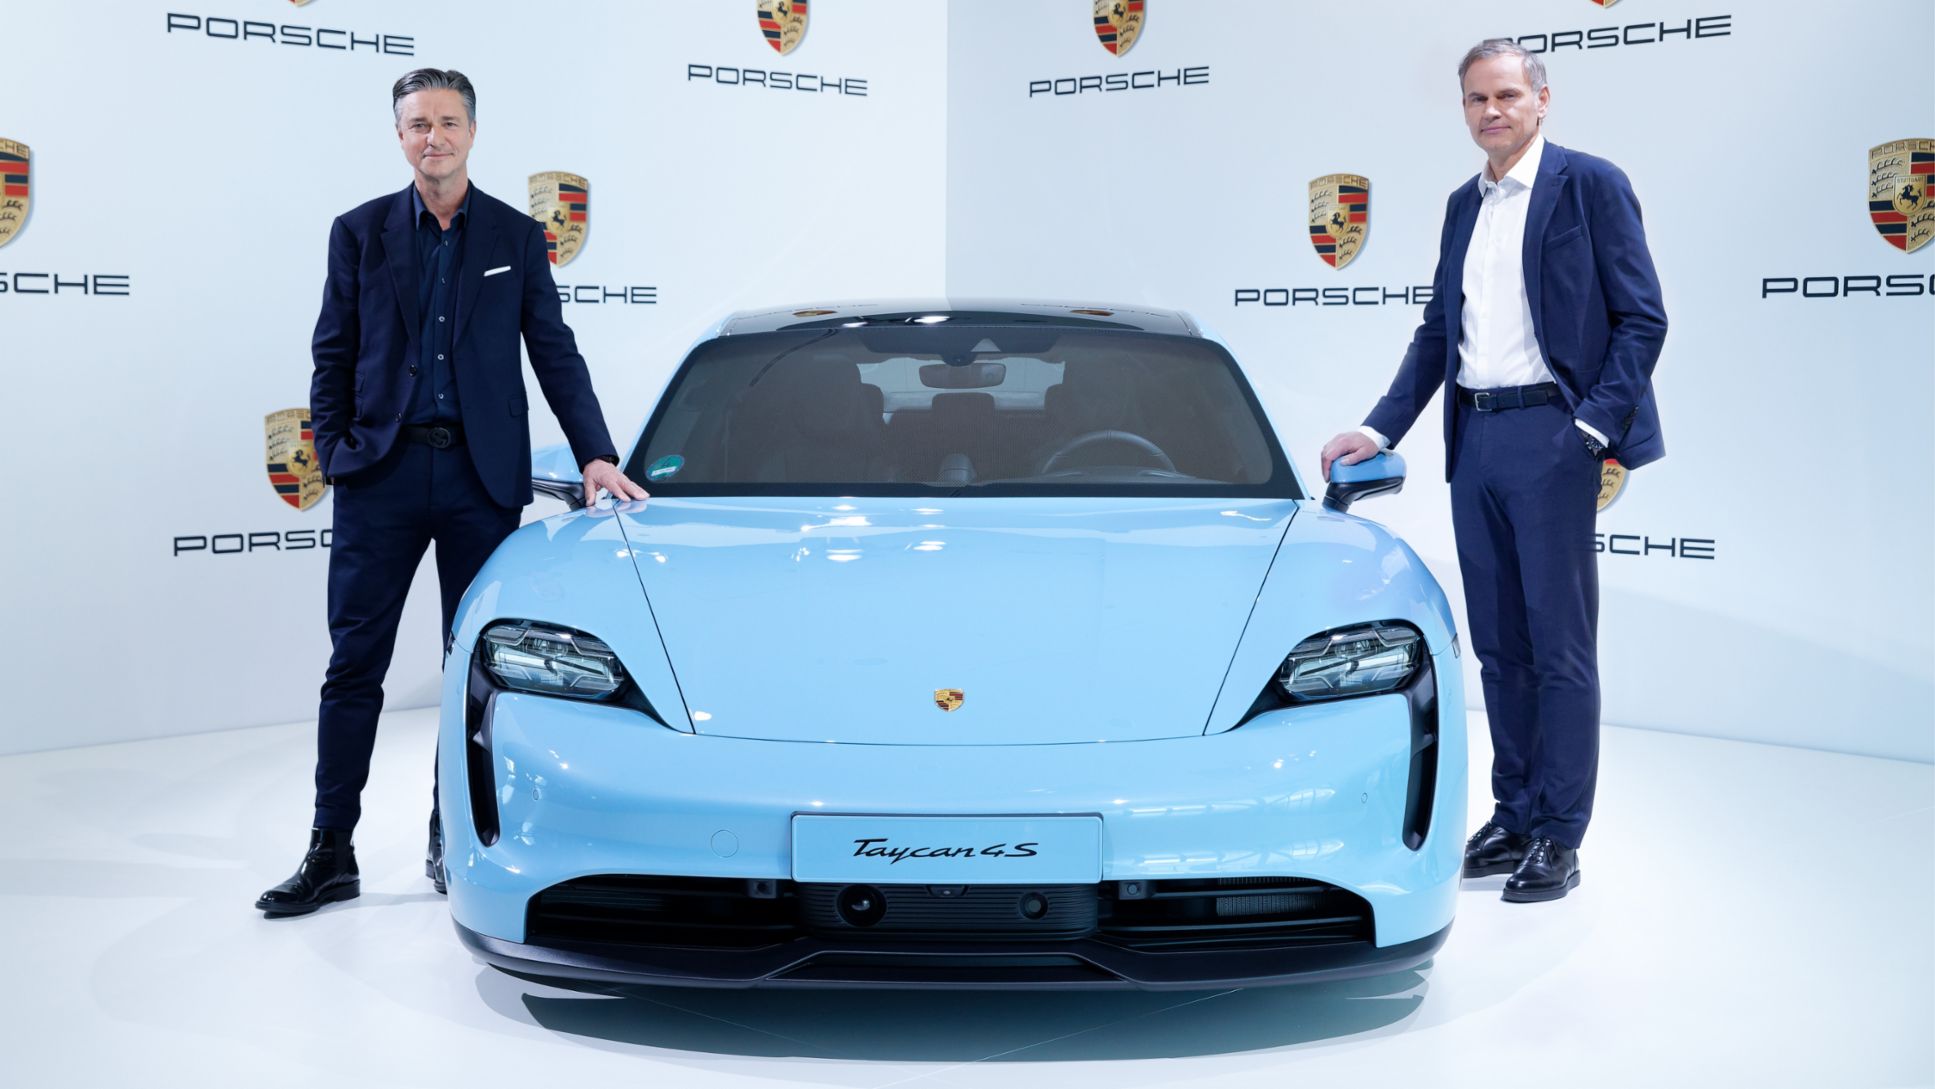 Lutz Meschke, Deputy Chairman of the Executive Board and Member of the Executive Board for Finance and IT, Oliver Blume, Chairman of the Executive Board, (Photomontage), Taycan 4S, annual press conference, 2020, Porsche AG